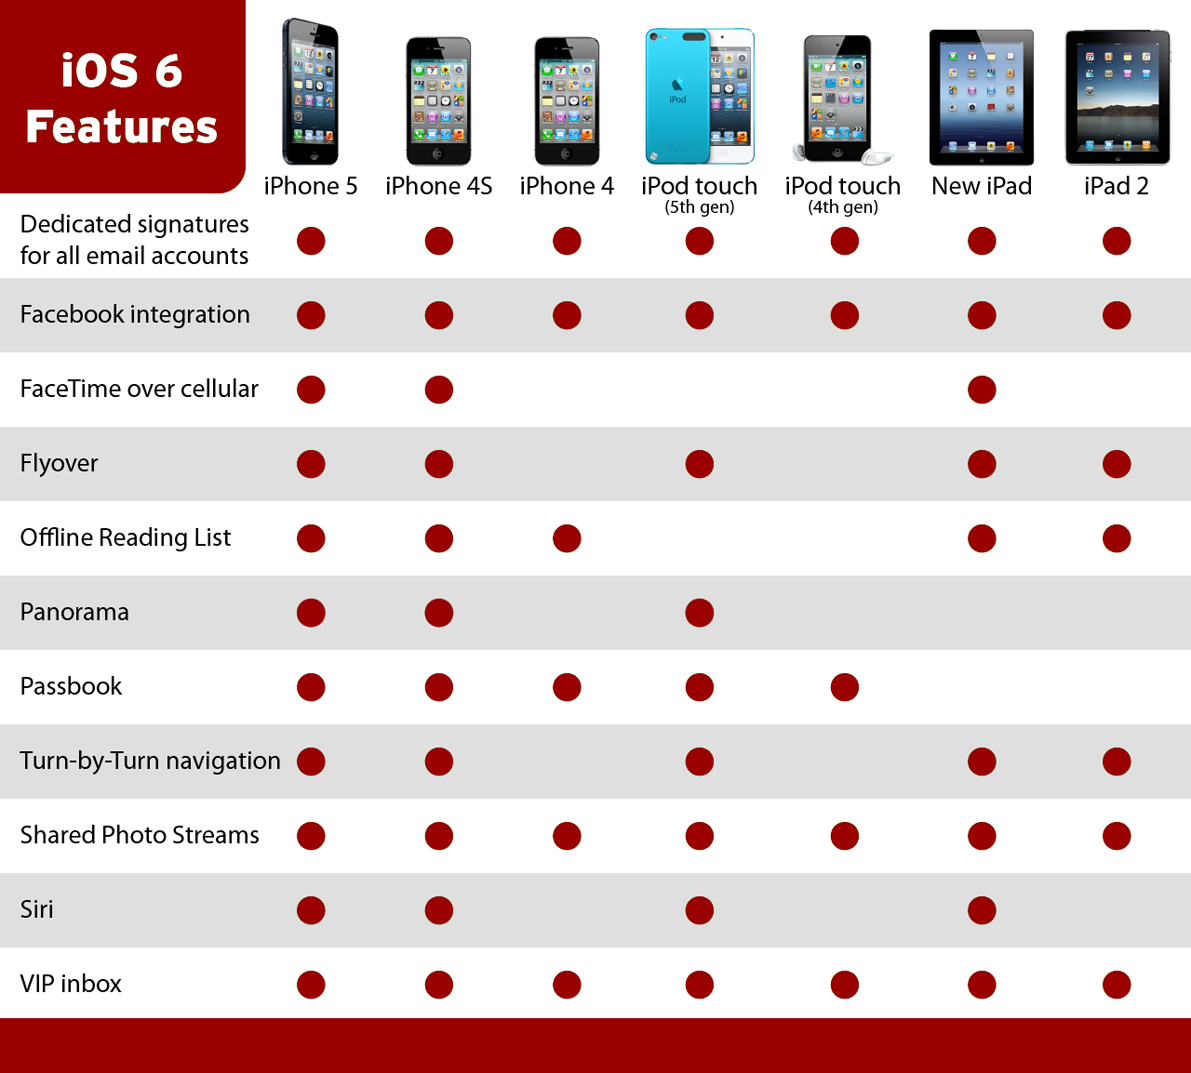 ios6_iphone4_iphone4s_iphone5_ipod+tuch_ipad3_ipad2_new+features.png